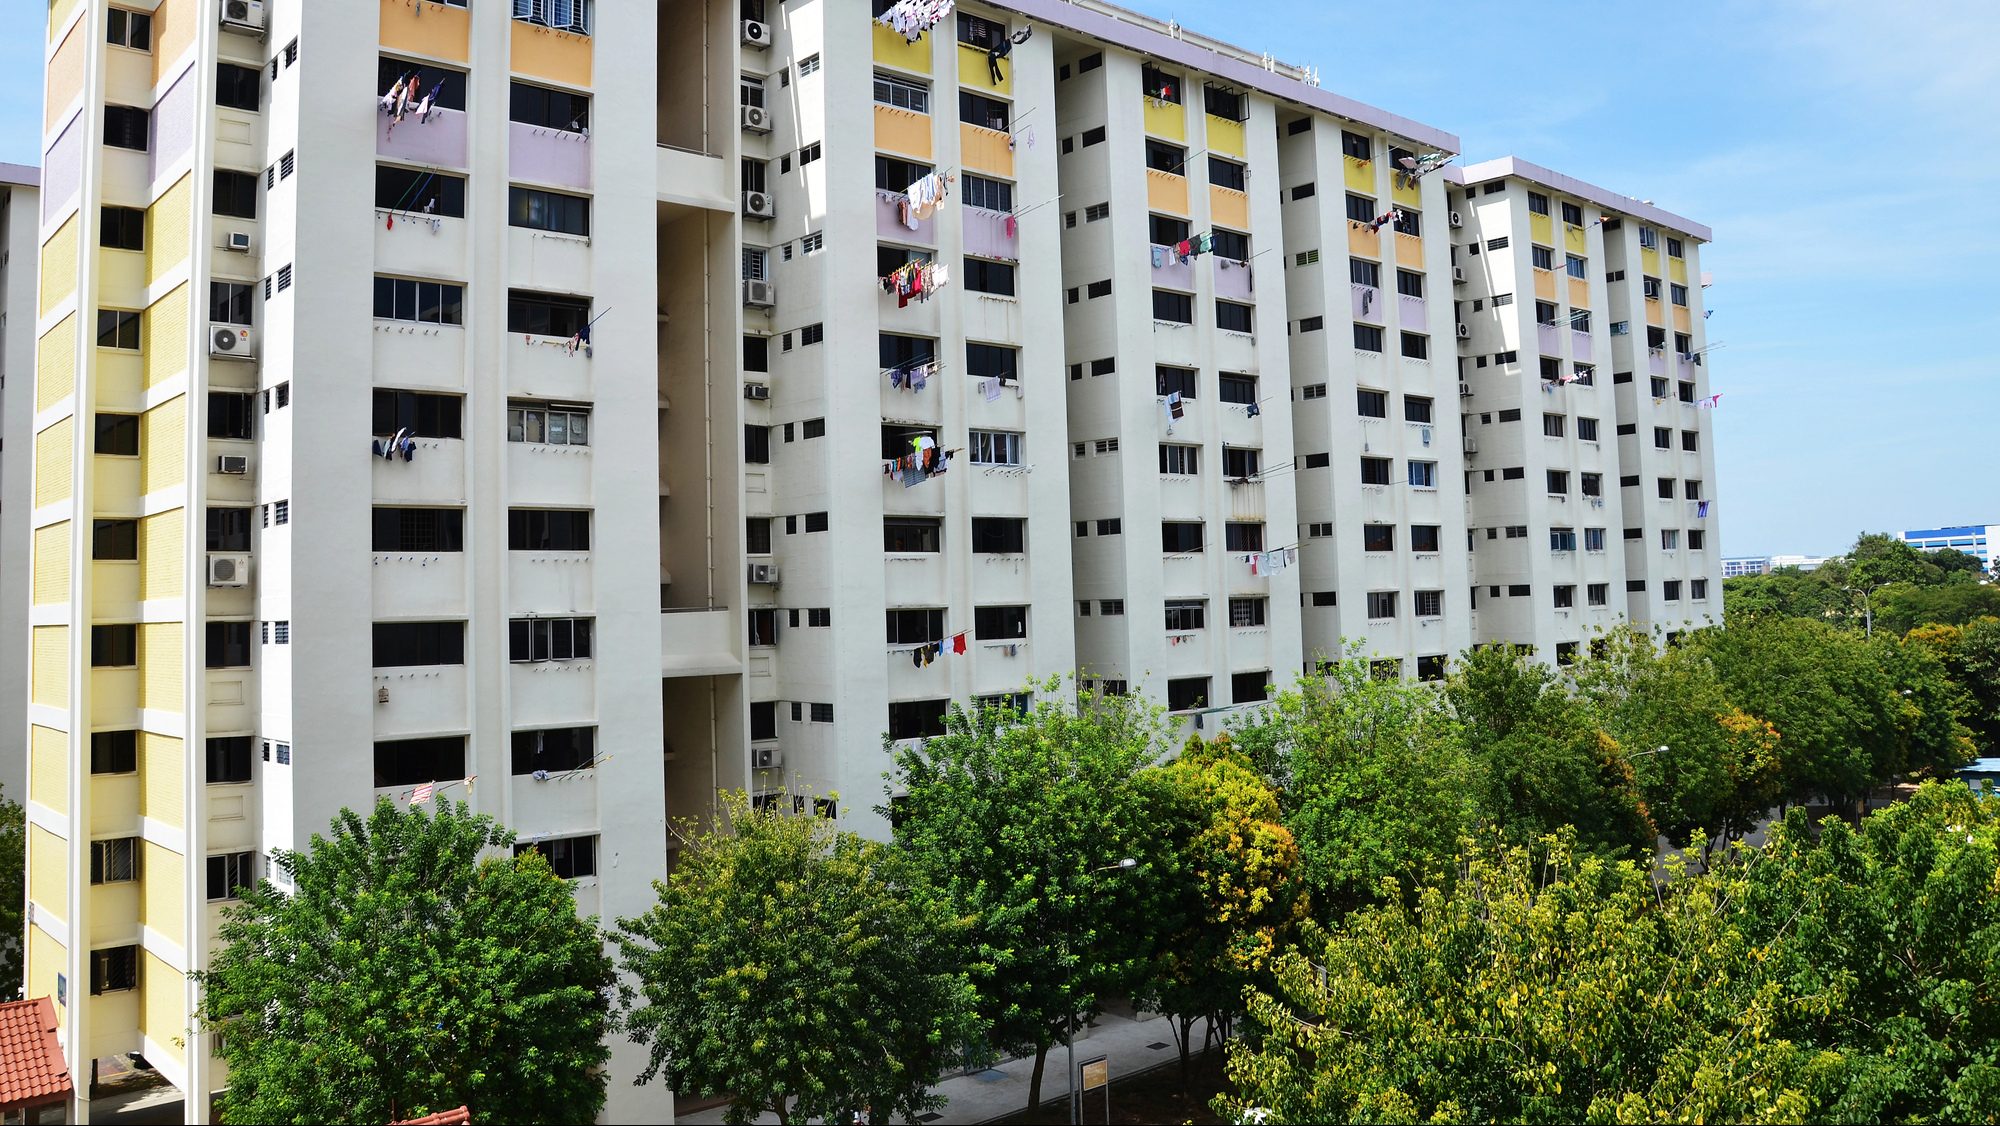 Singapore residential building, also known as HDB